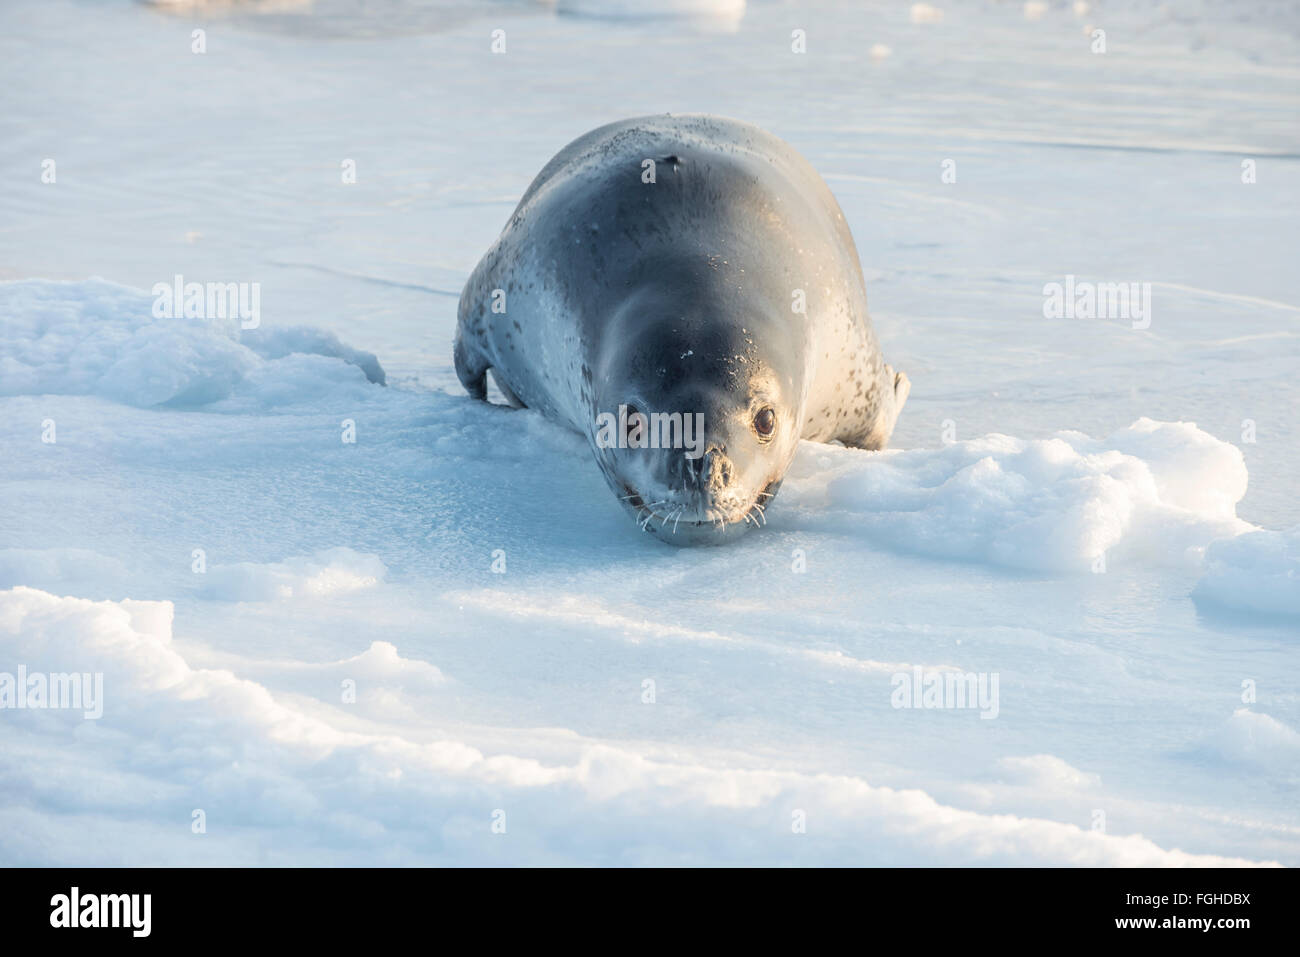 A leopard seal on the surface of the ice near Cape Evans, Antarctica. Stock Photo